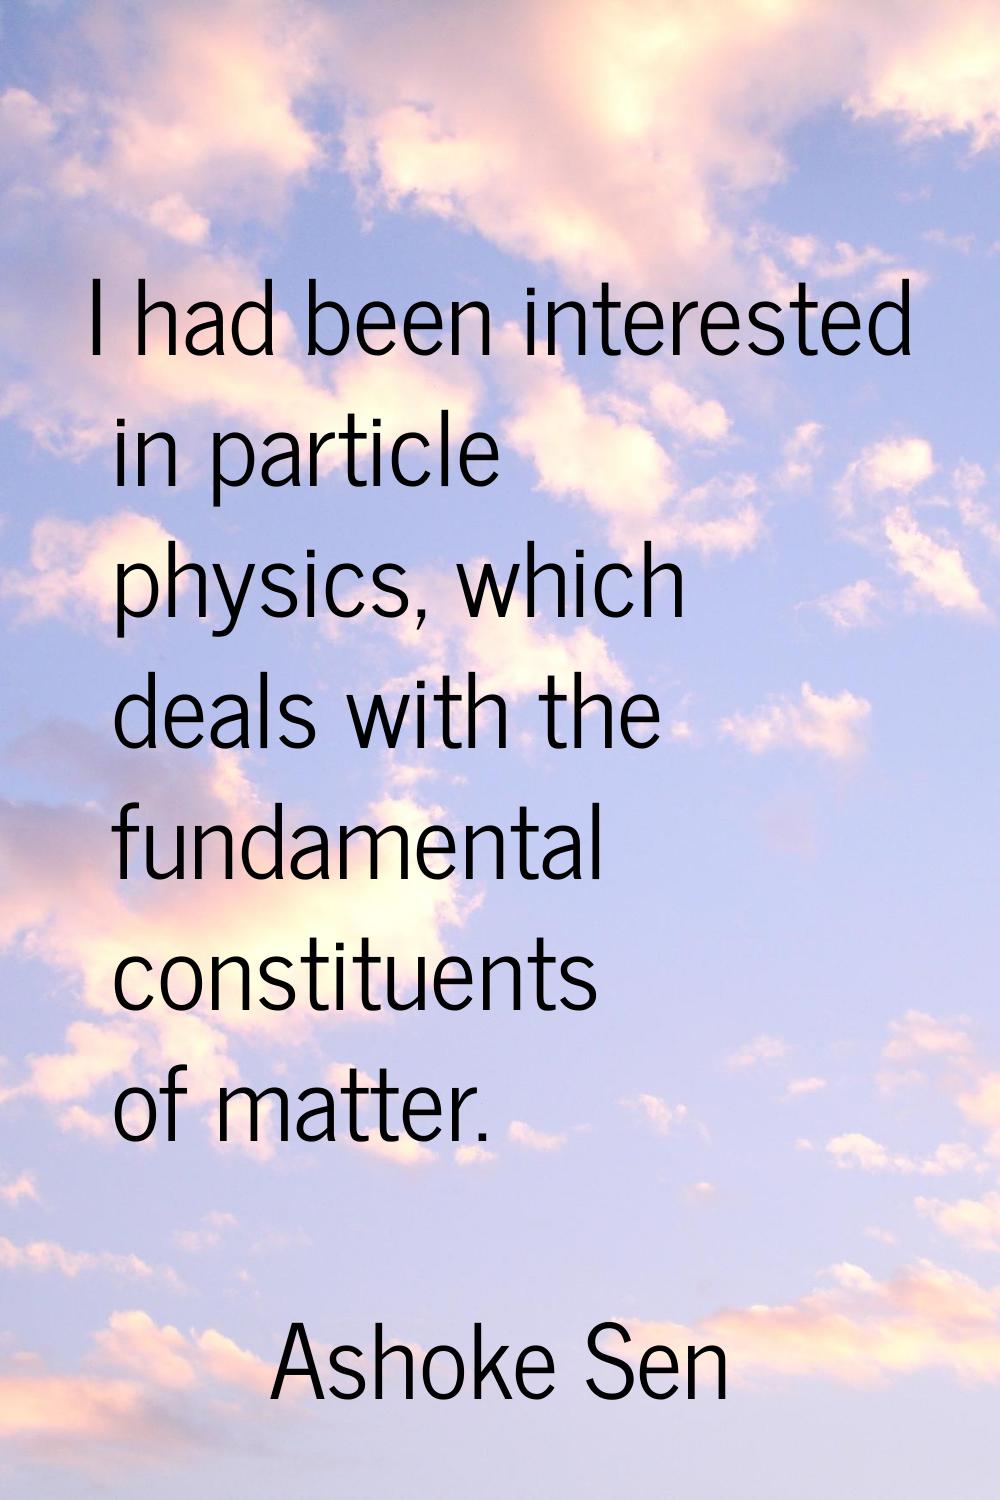 I had been interested in particle physics, which deals with the fundamental constituents of matter.